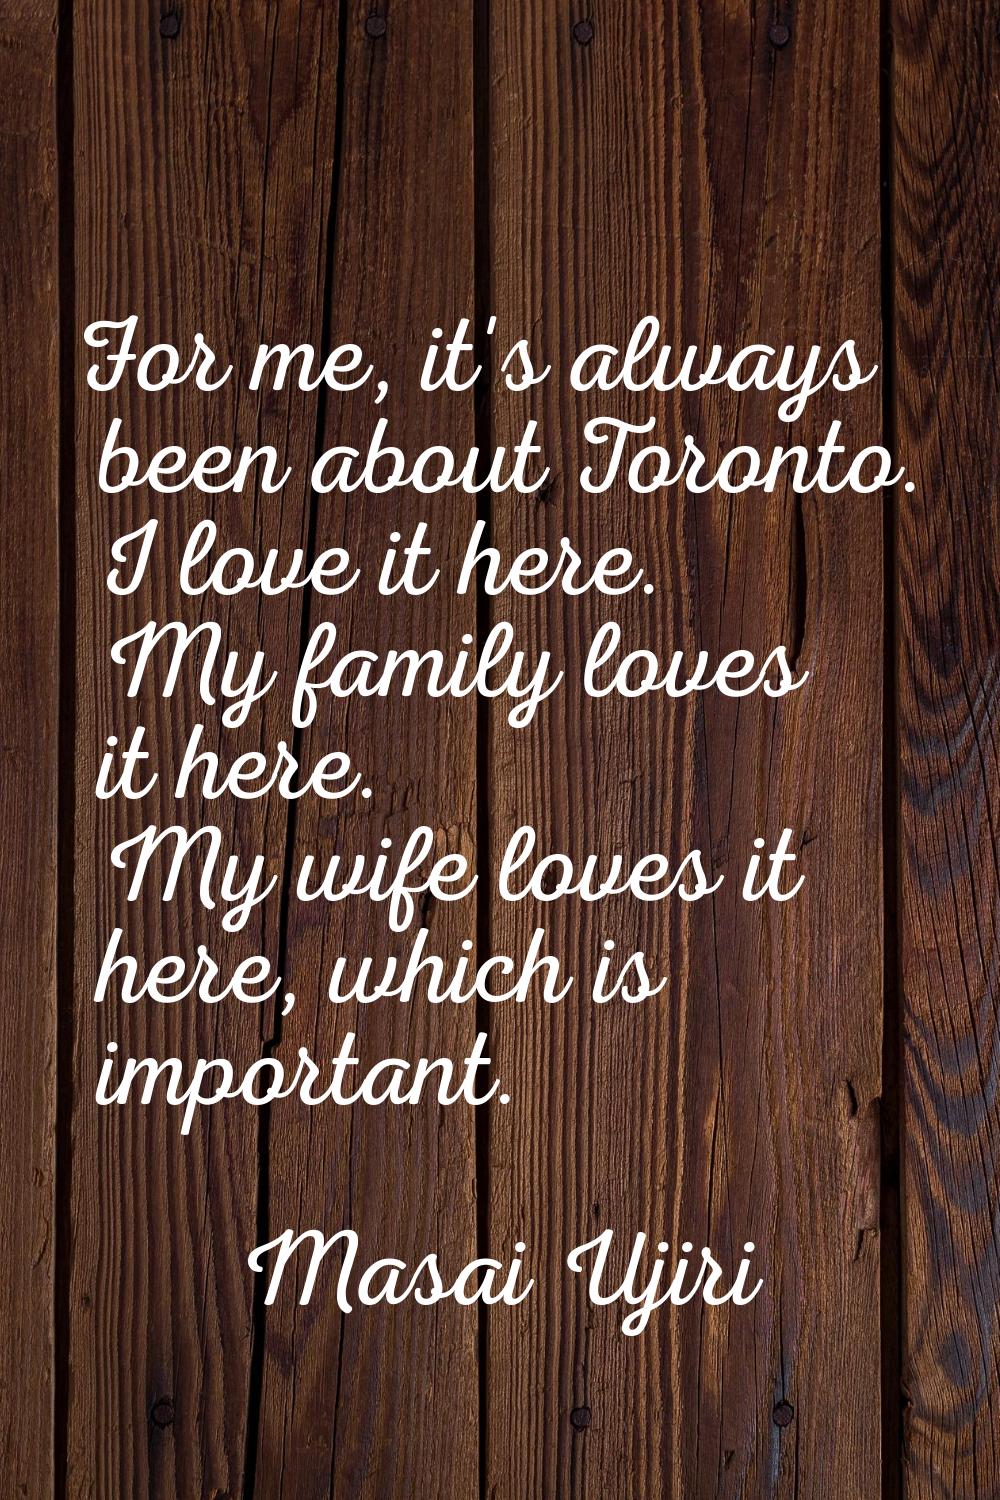 For me, it's always been about Toronto. I love it here. My family loves it here. My wife loves it h